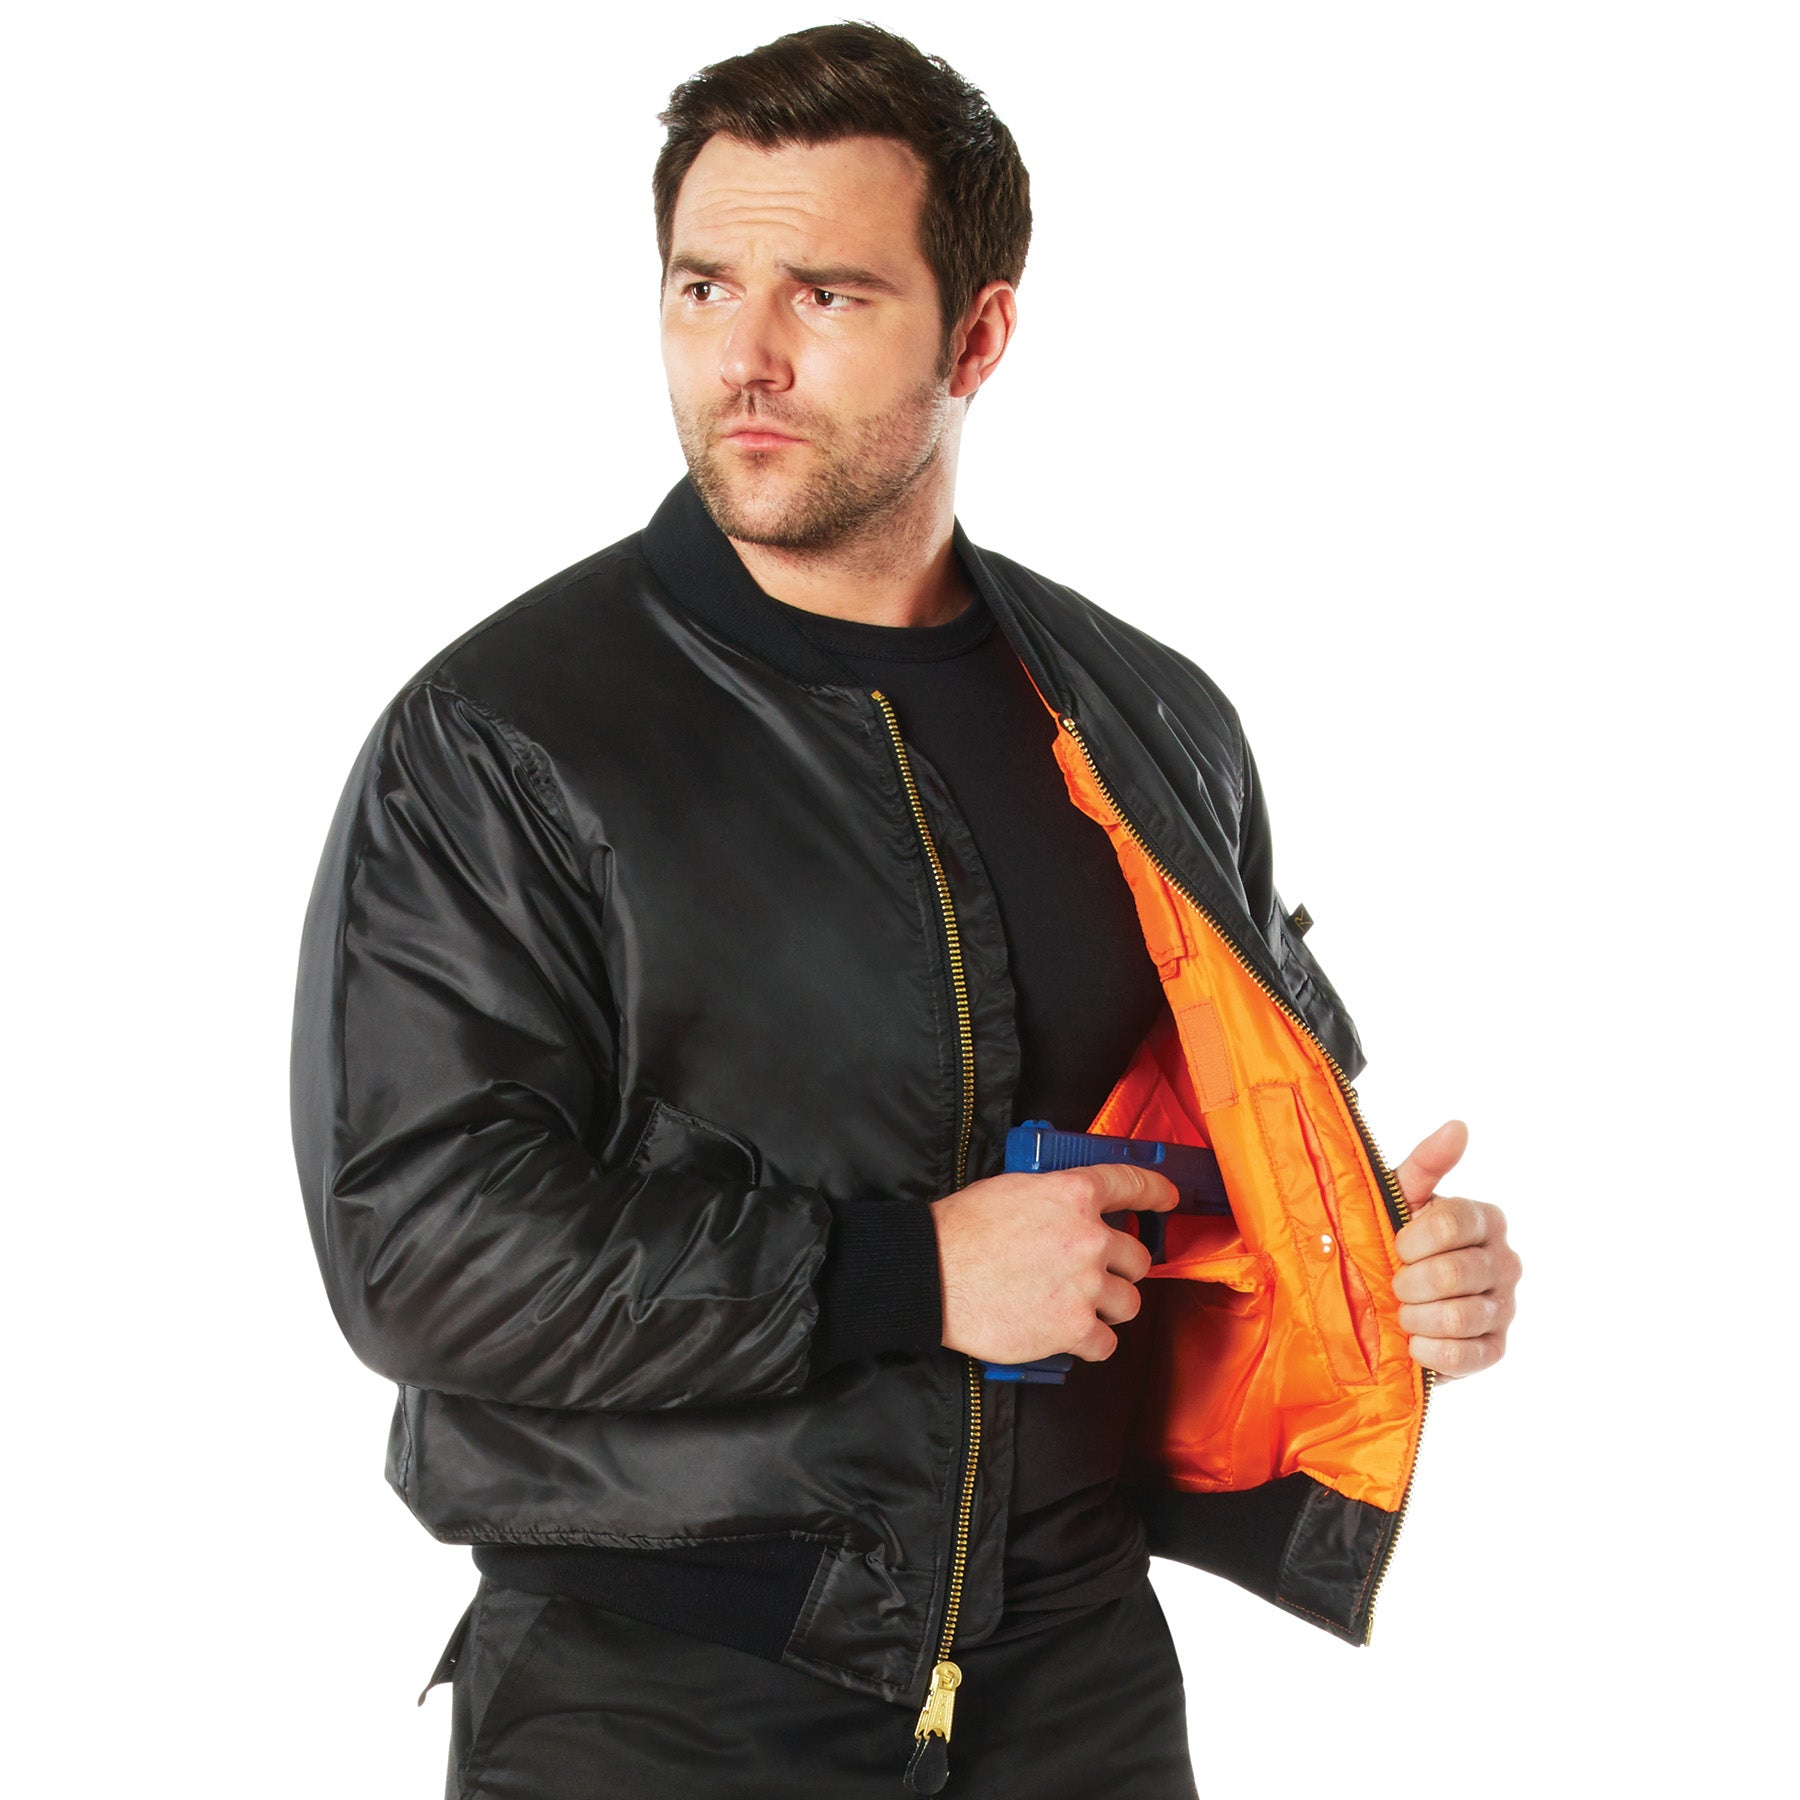 Concealed Carry MA-1 Flight Jacket - Tactical Choice Plus